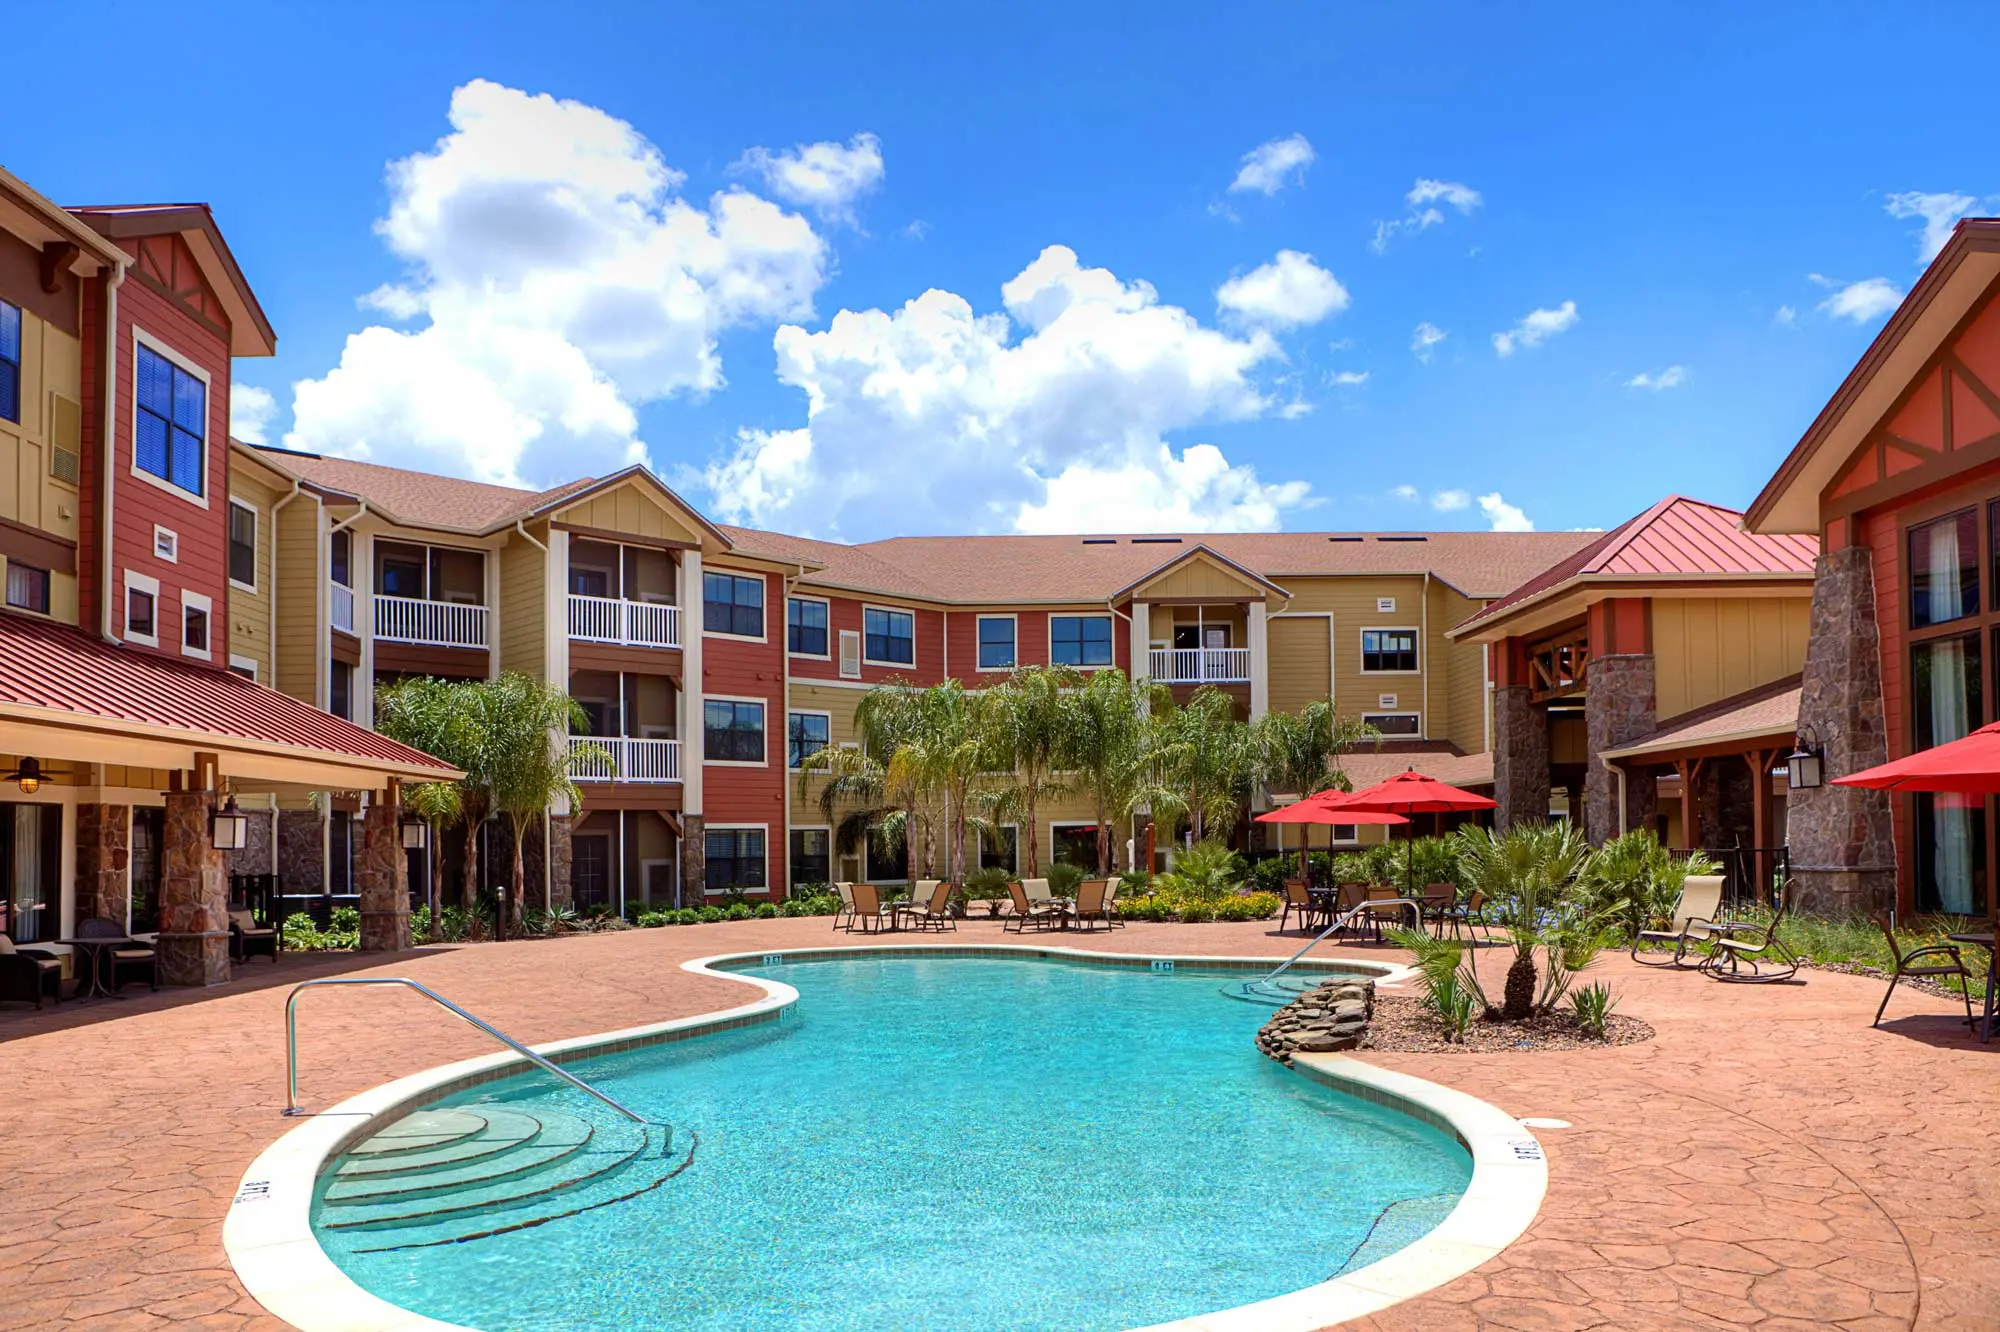 A pool and pool deck surrounded by senior living apartments on a sunny day in the Villages in Florida